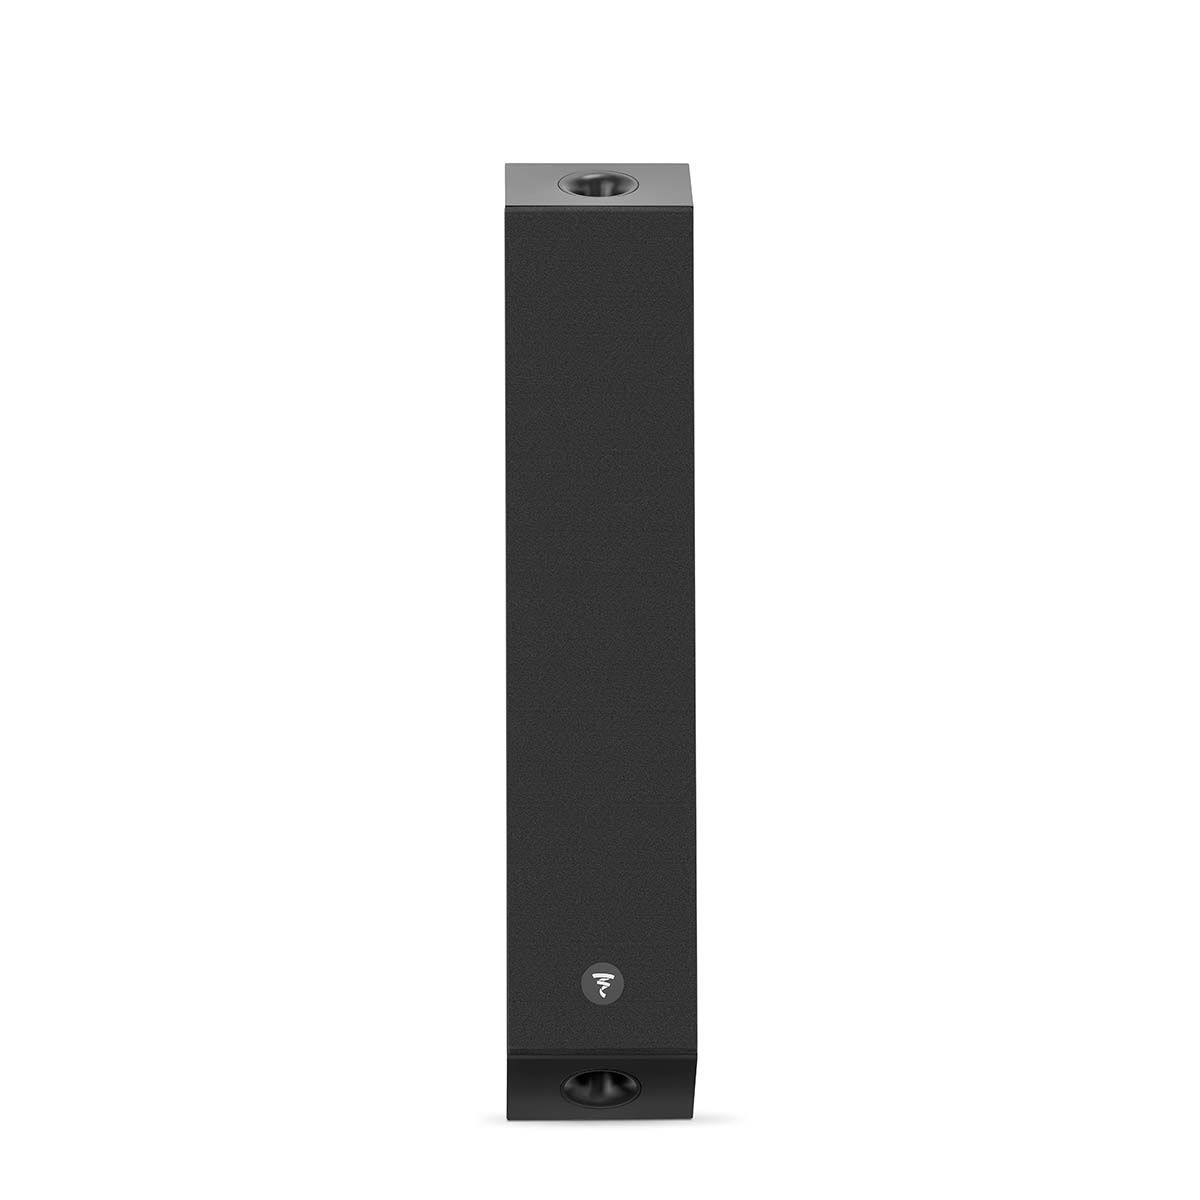 Focal On Wall 301 Speaker, Satin Black, vertical front view with grille